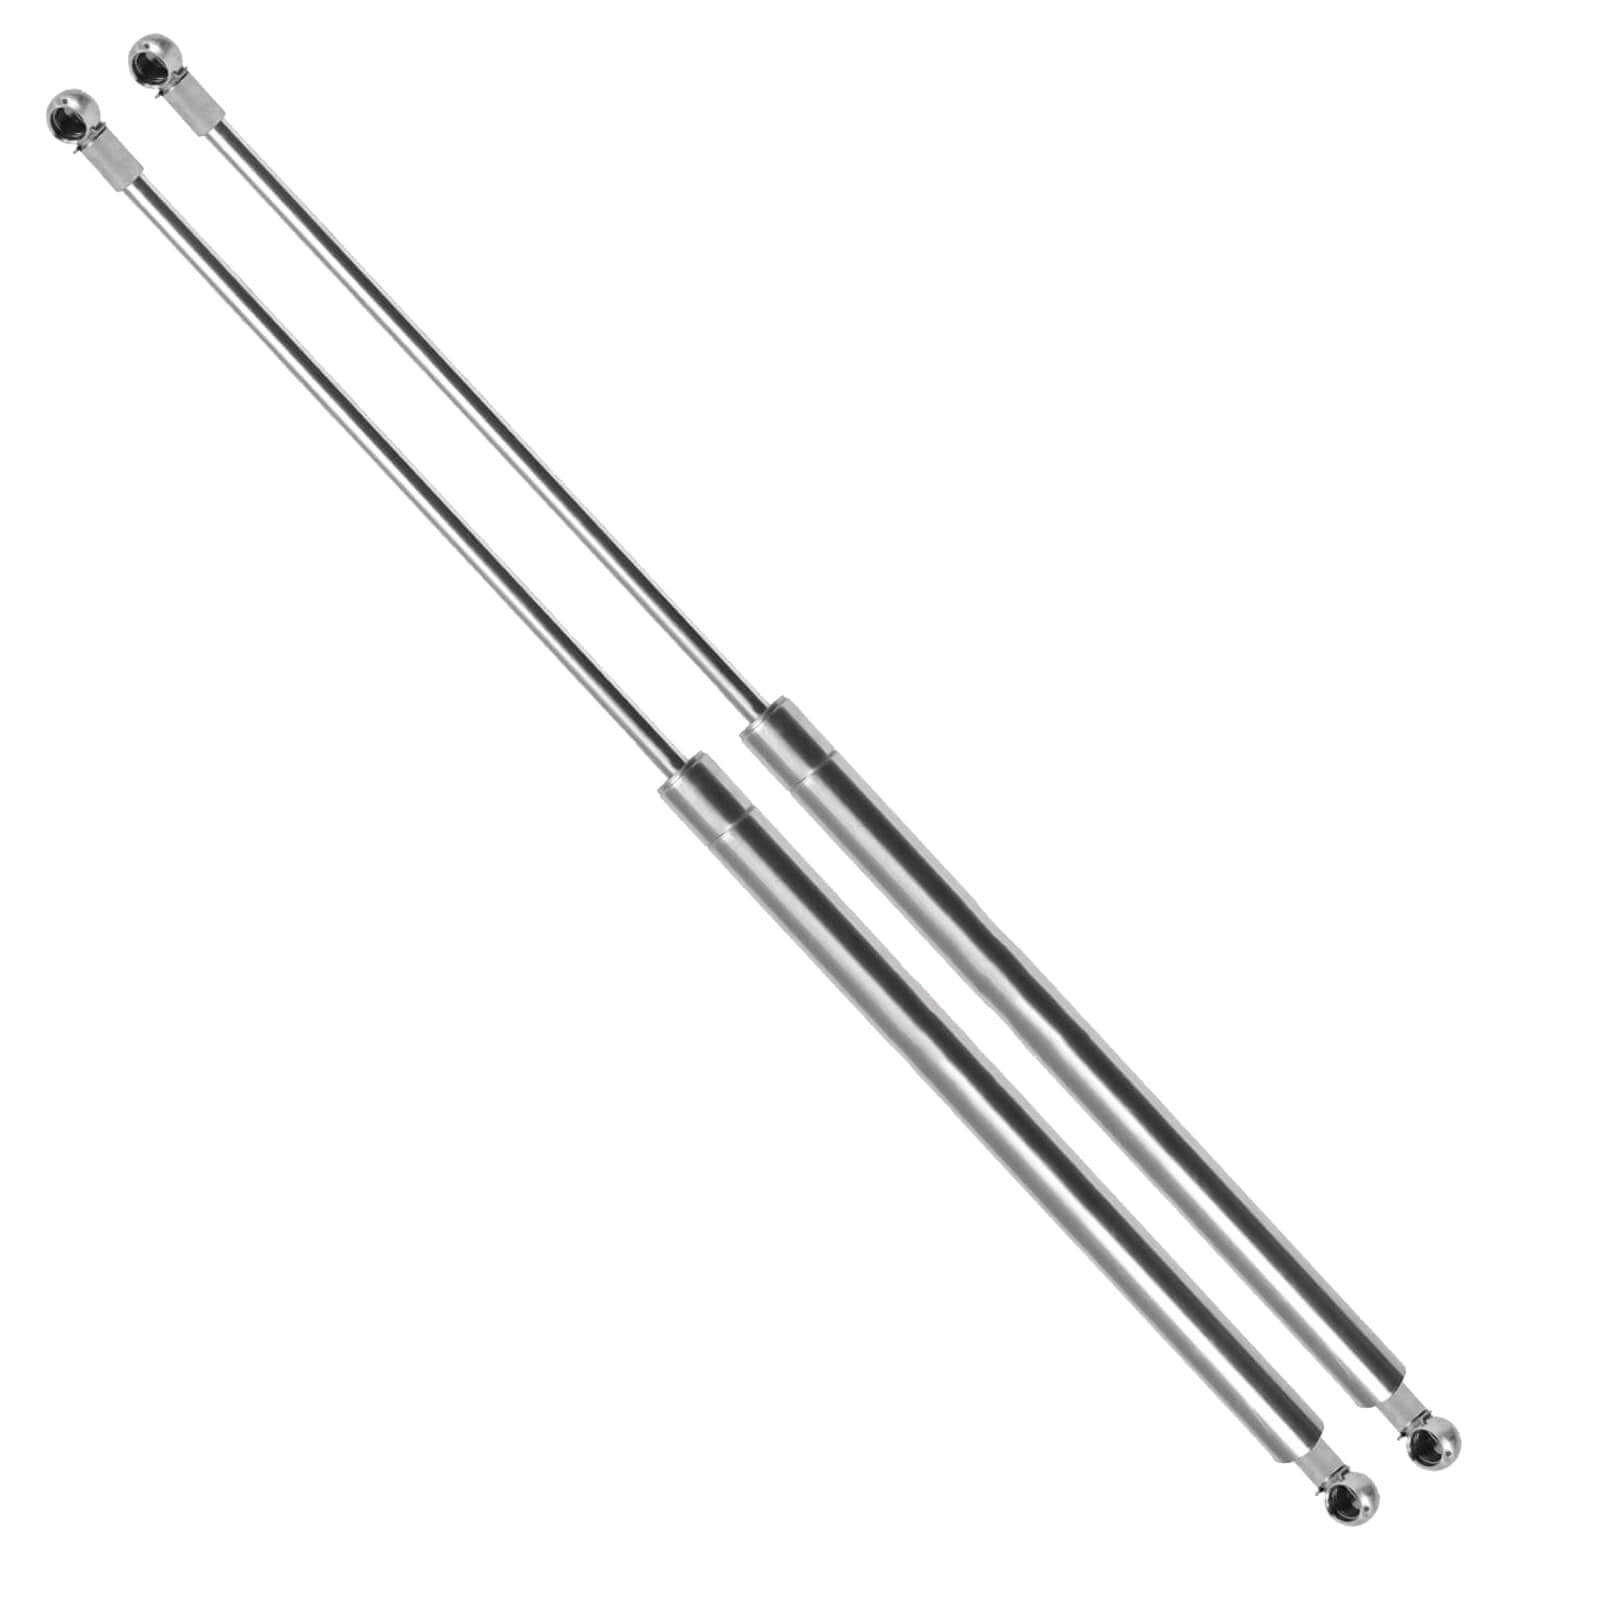 2 4672 Extended Length 10 Inches Compressed Length 6.75 Inches Froce 51 Lbs Universal Lift Supports Struts Shocks Dampers Springs Props Dayincar Qty 